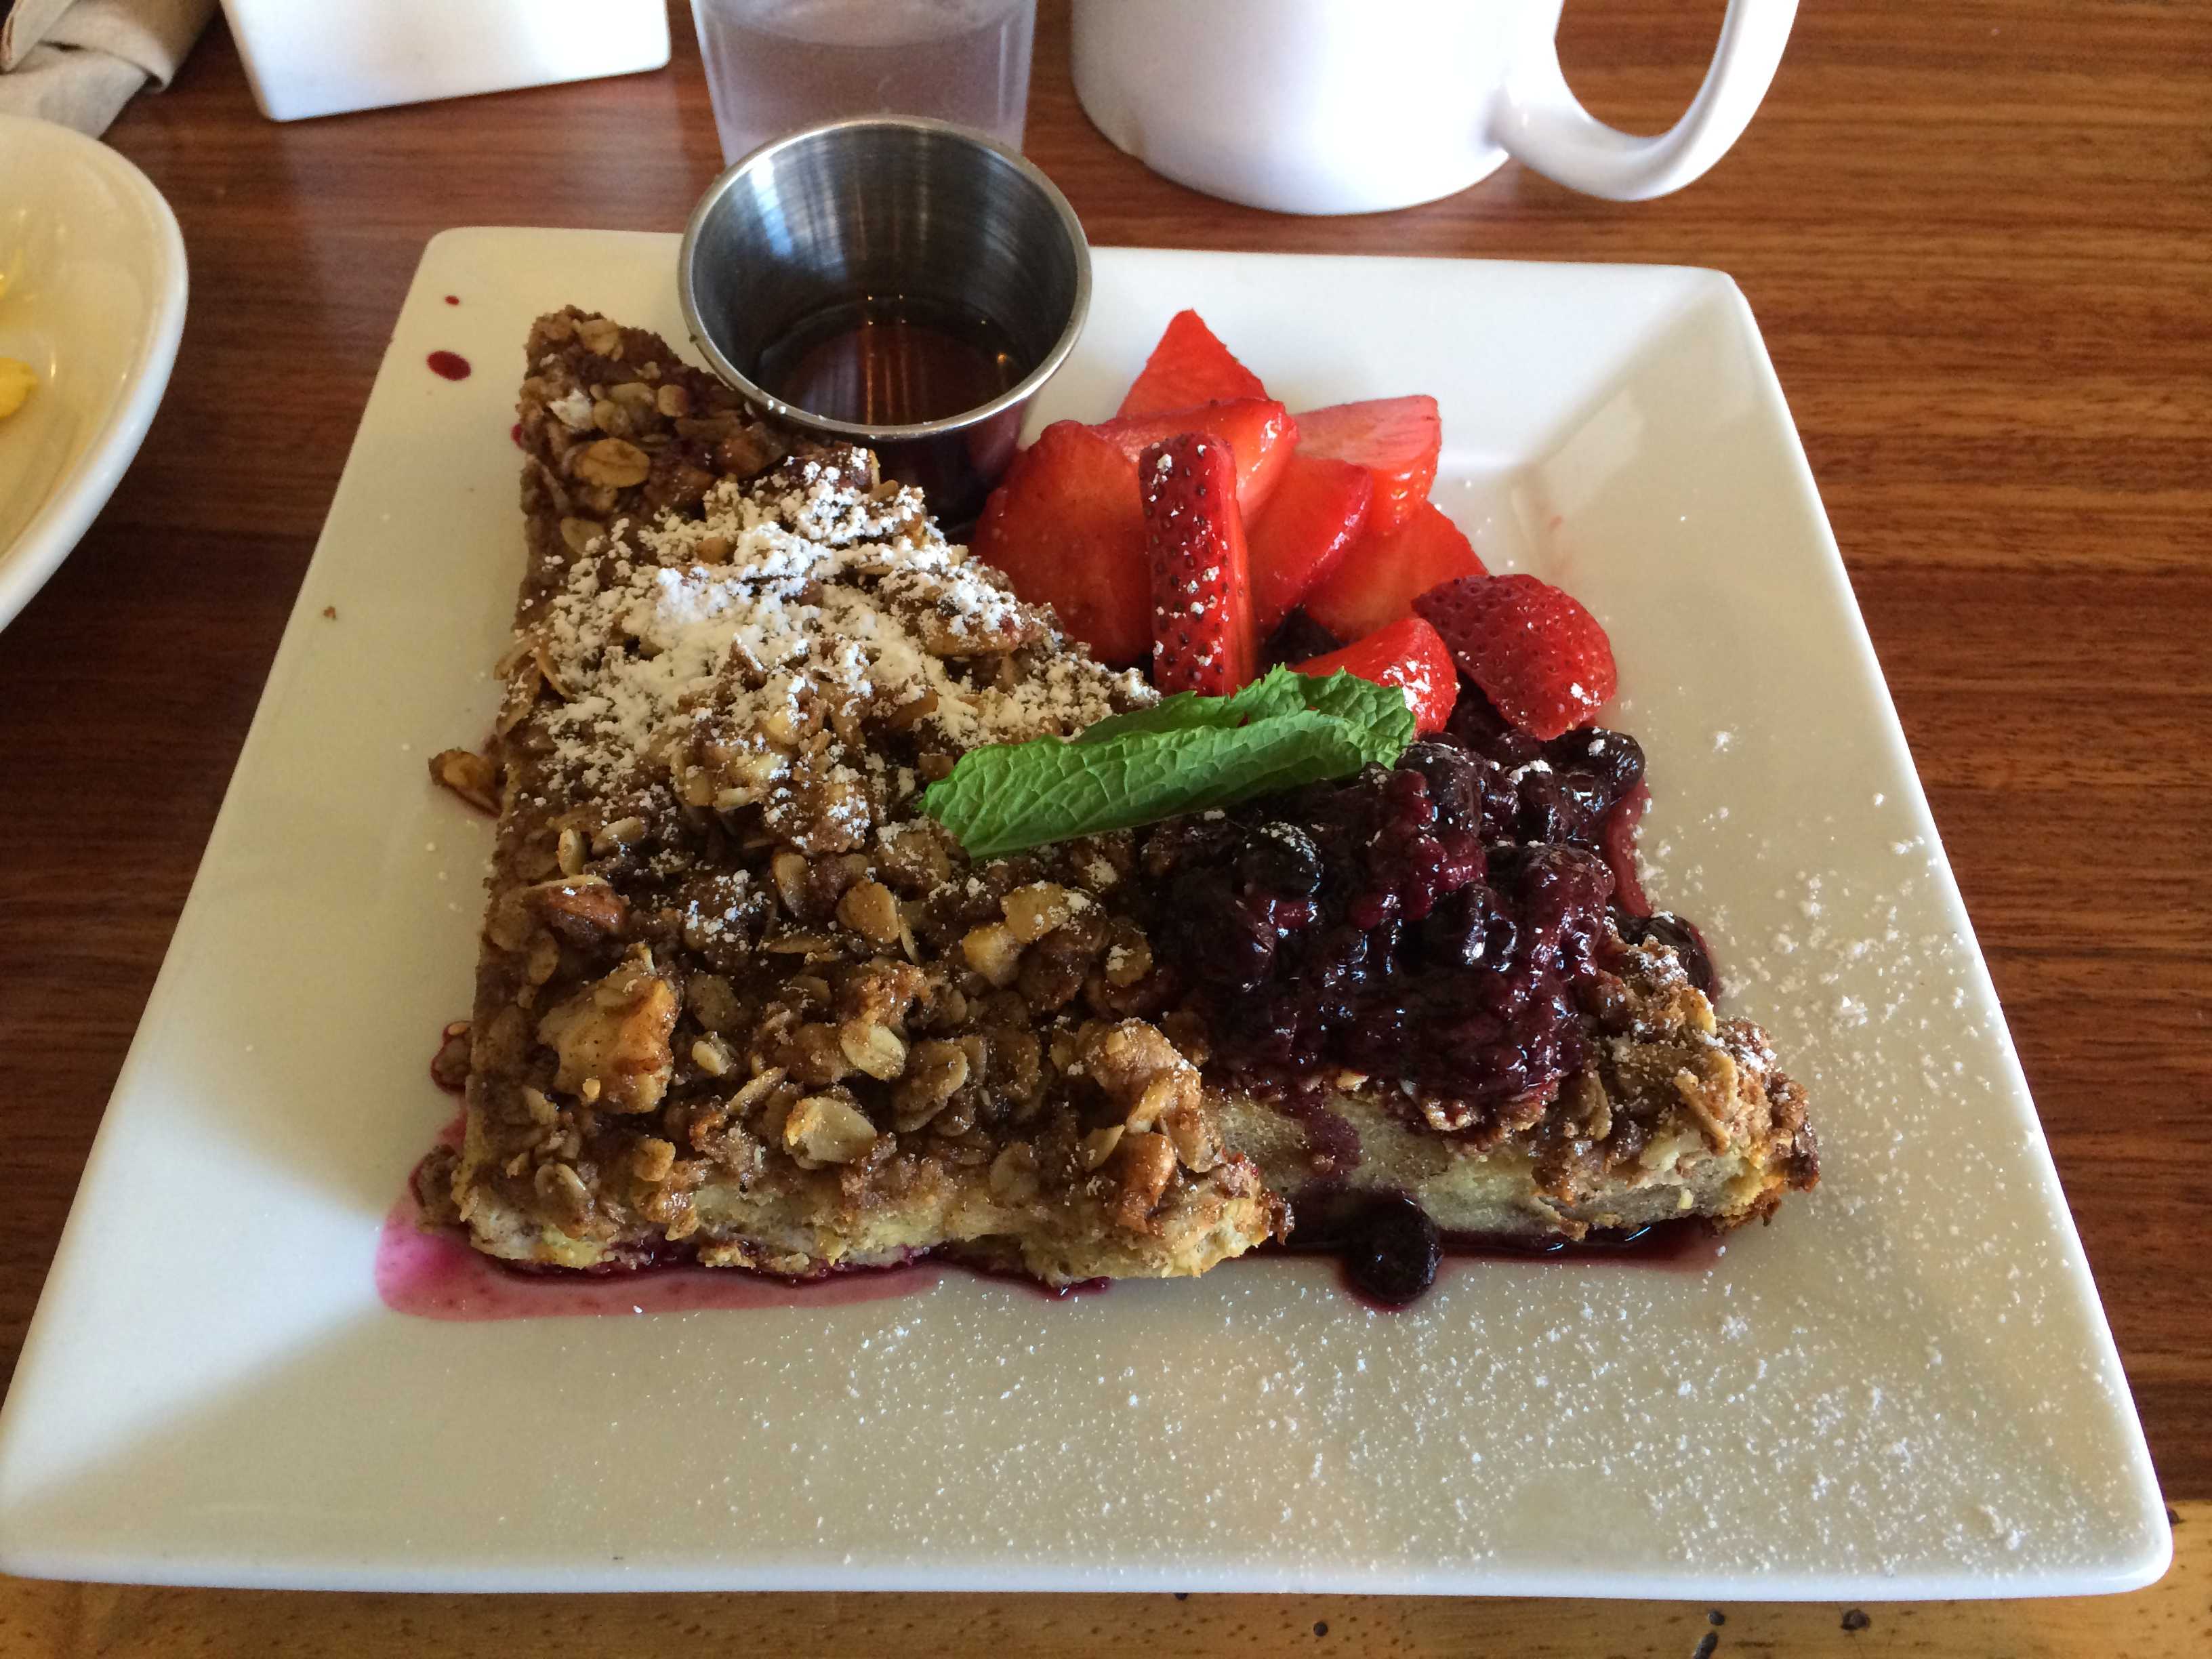 The Kensington Cafe has a lot to offer when it comes to breakfast. Photo credit: Michelle Moran